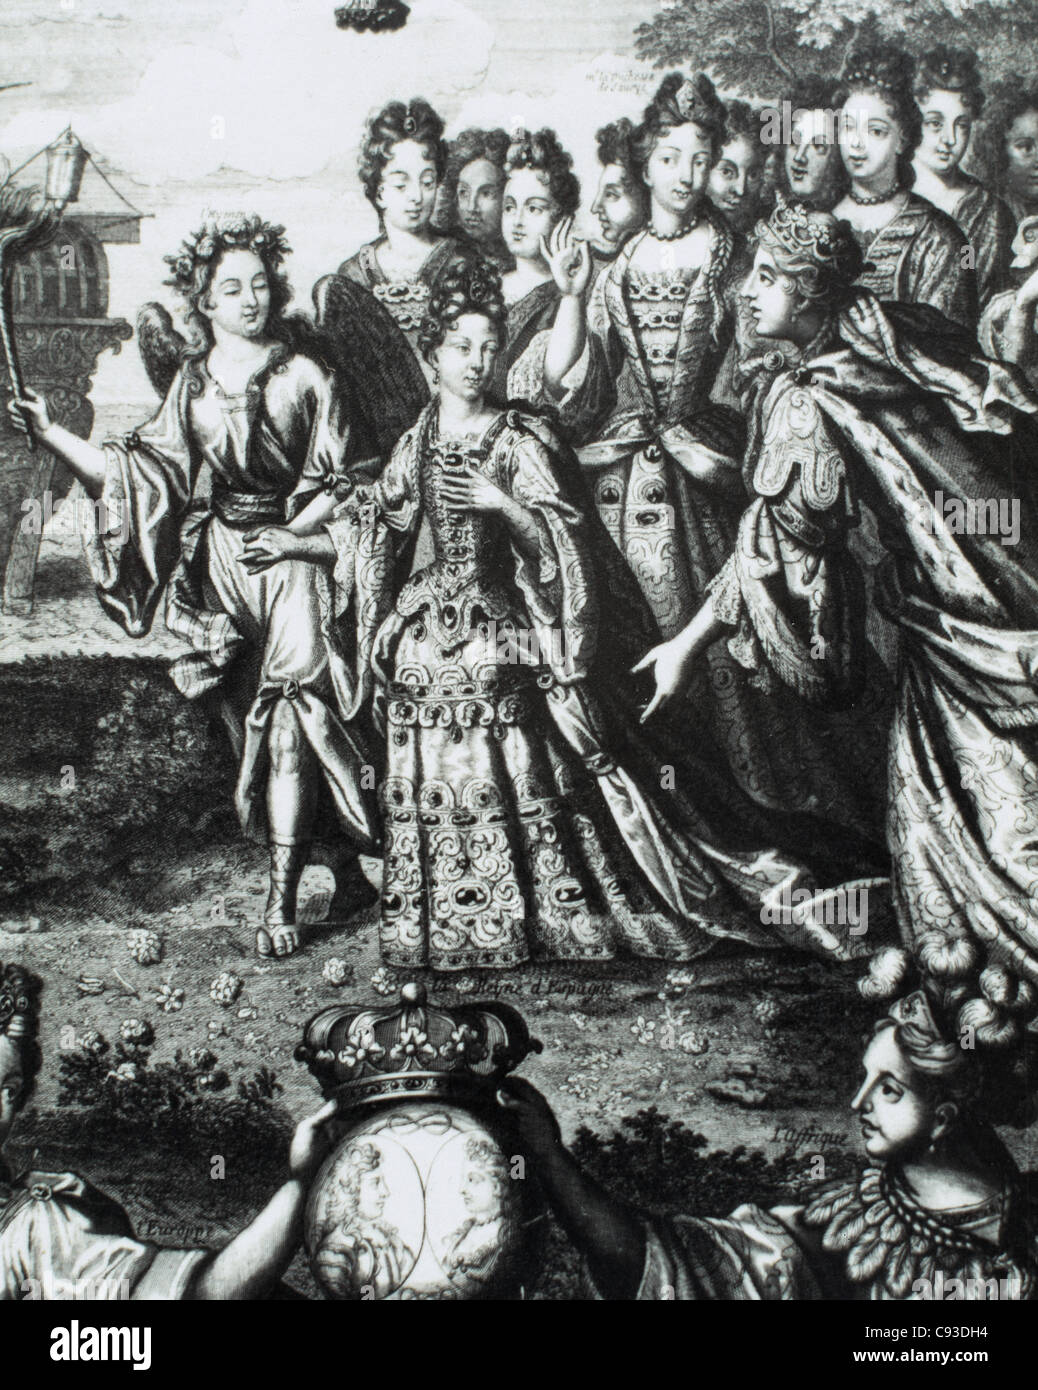 Maria Luisa Gabriela of Savoy (1688-1714). First wife of Philip V of Spain.  Arrival of queen Maria Luisa of Savoy. Engraving. Stock Photo